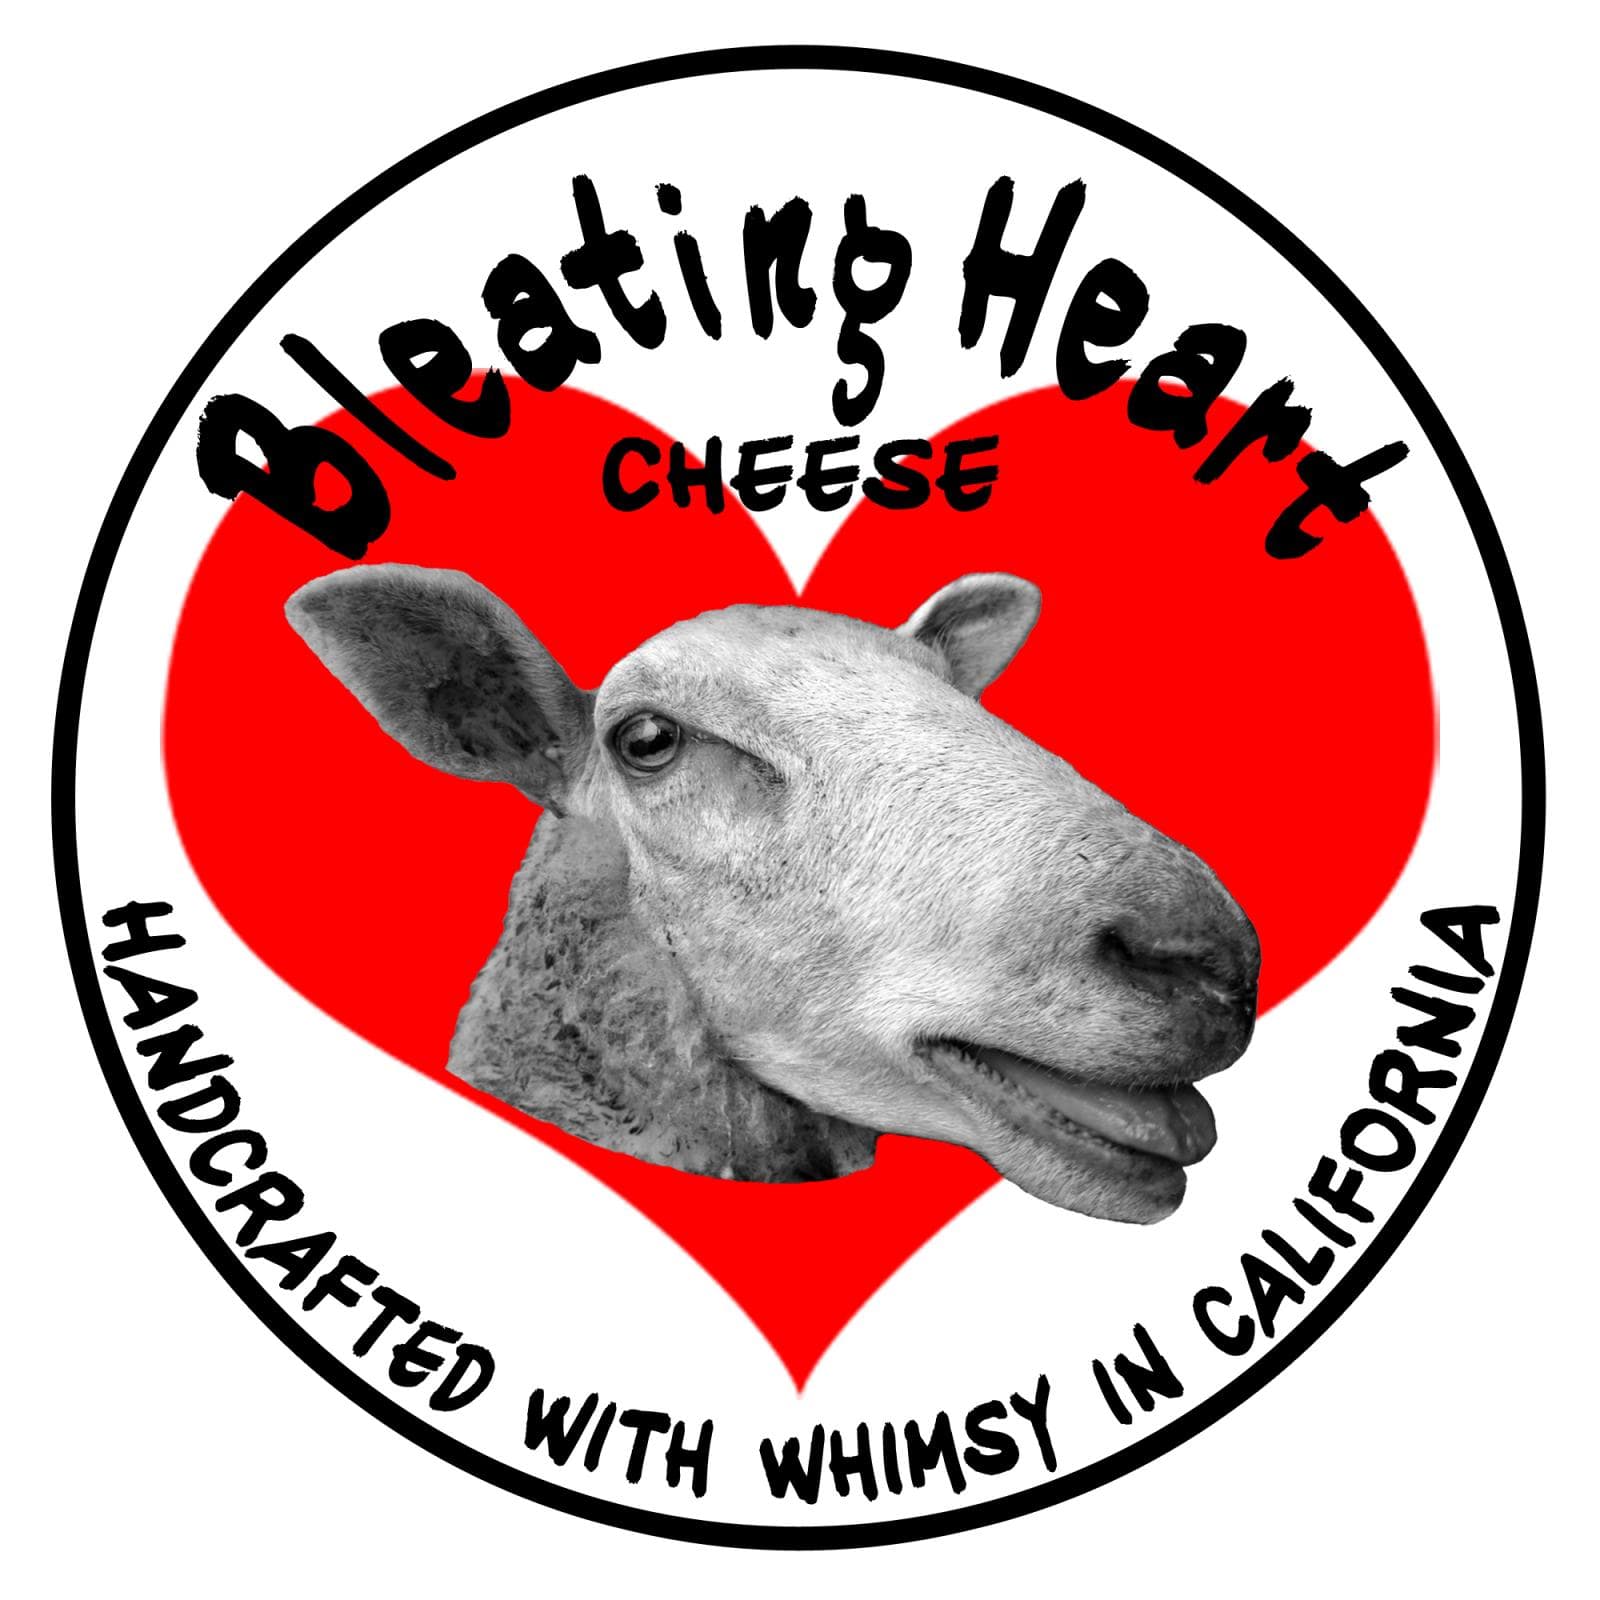 Name Heart Logo - The Story of the Name & Logo | Bleating Heart Cheese